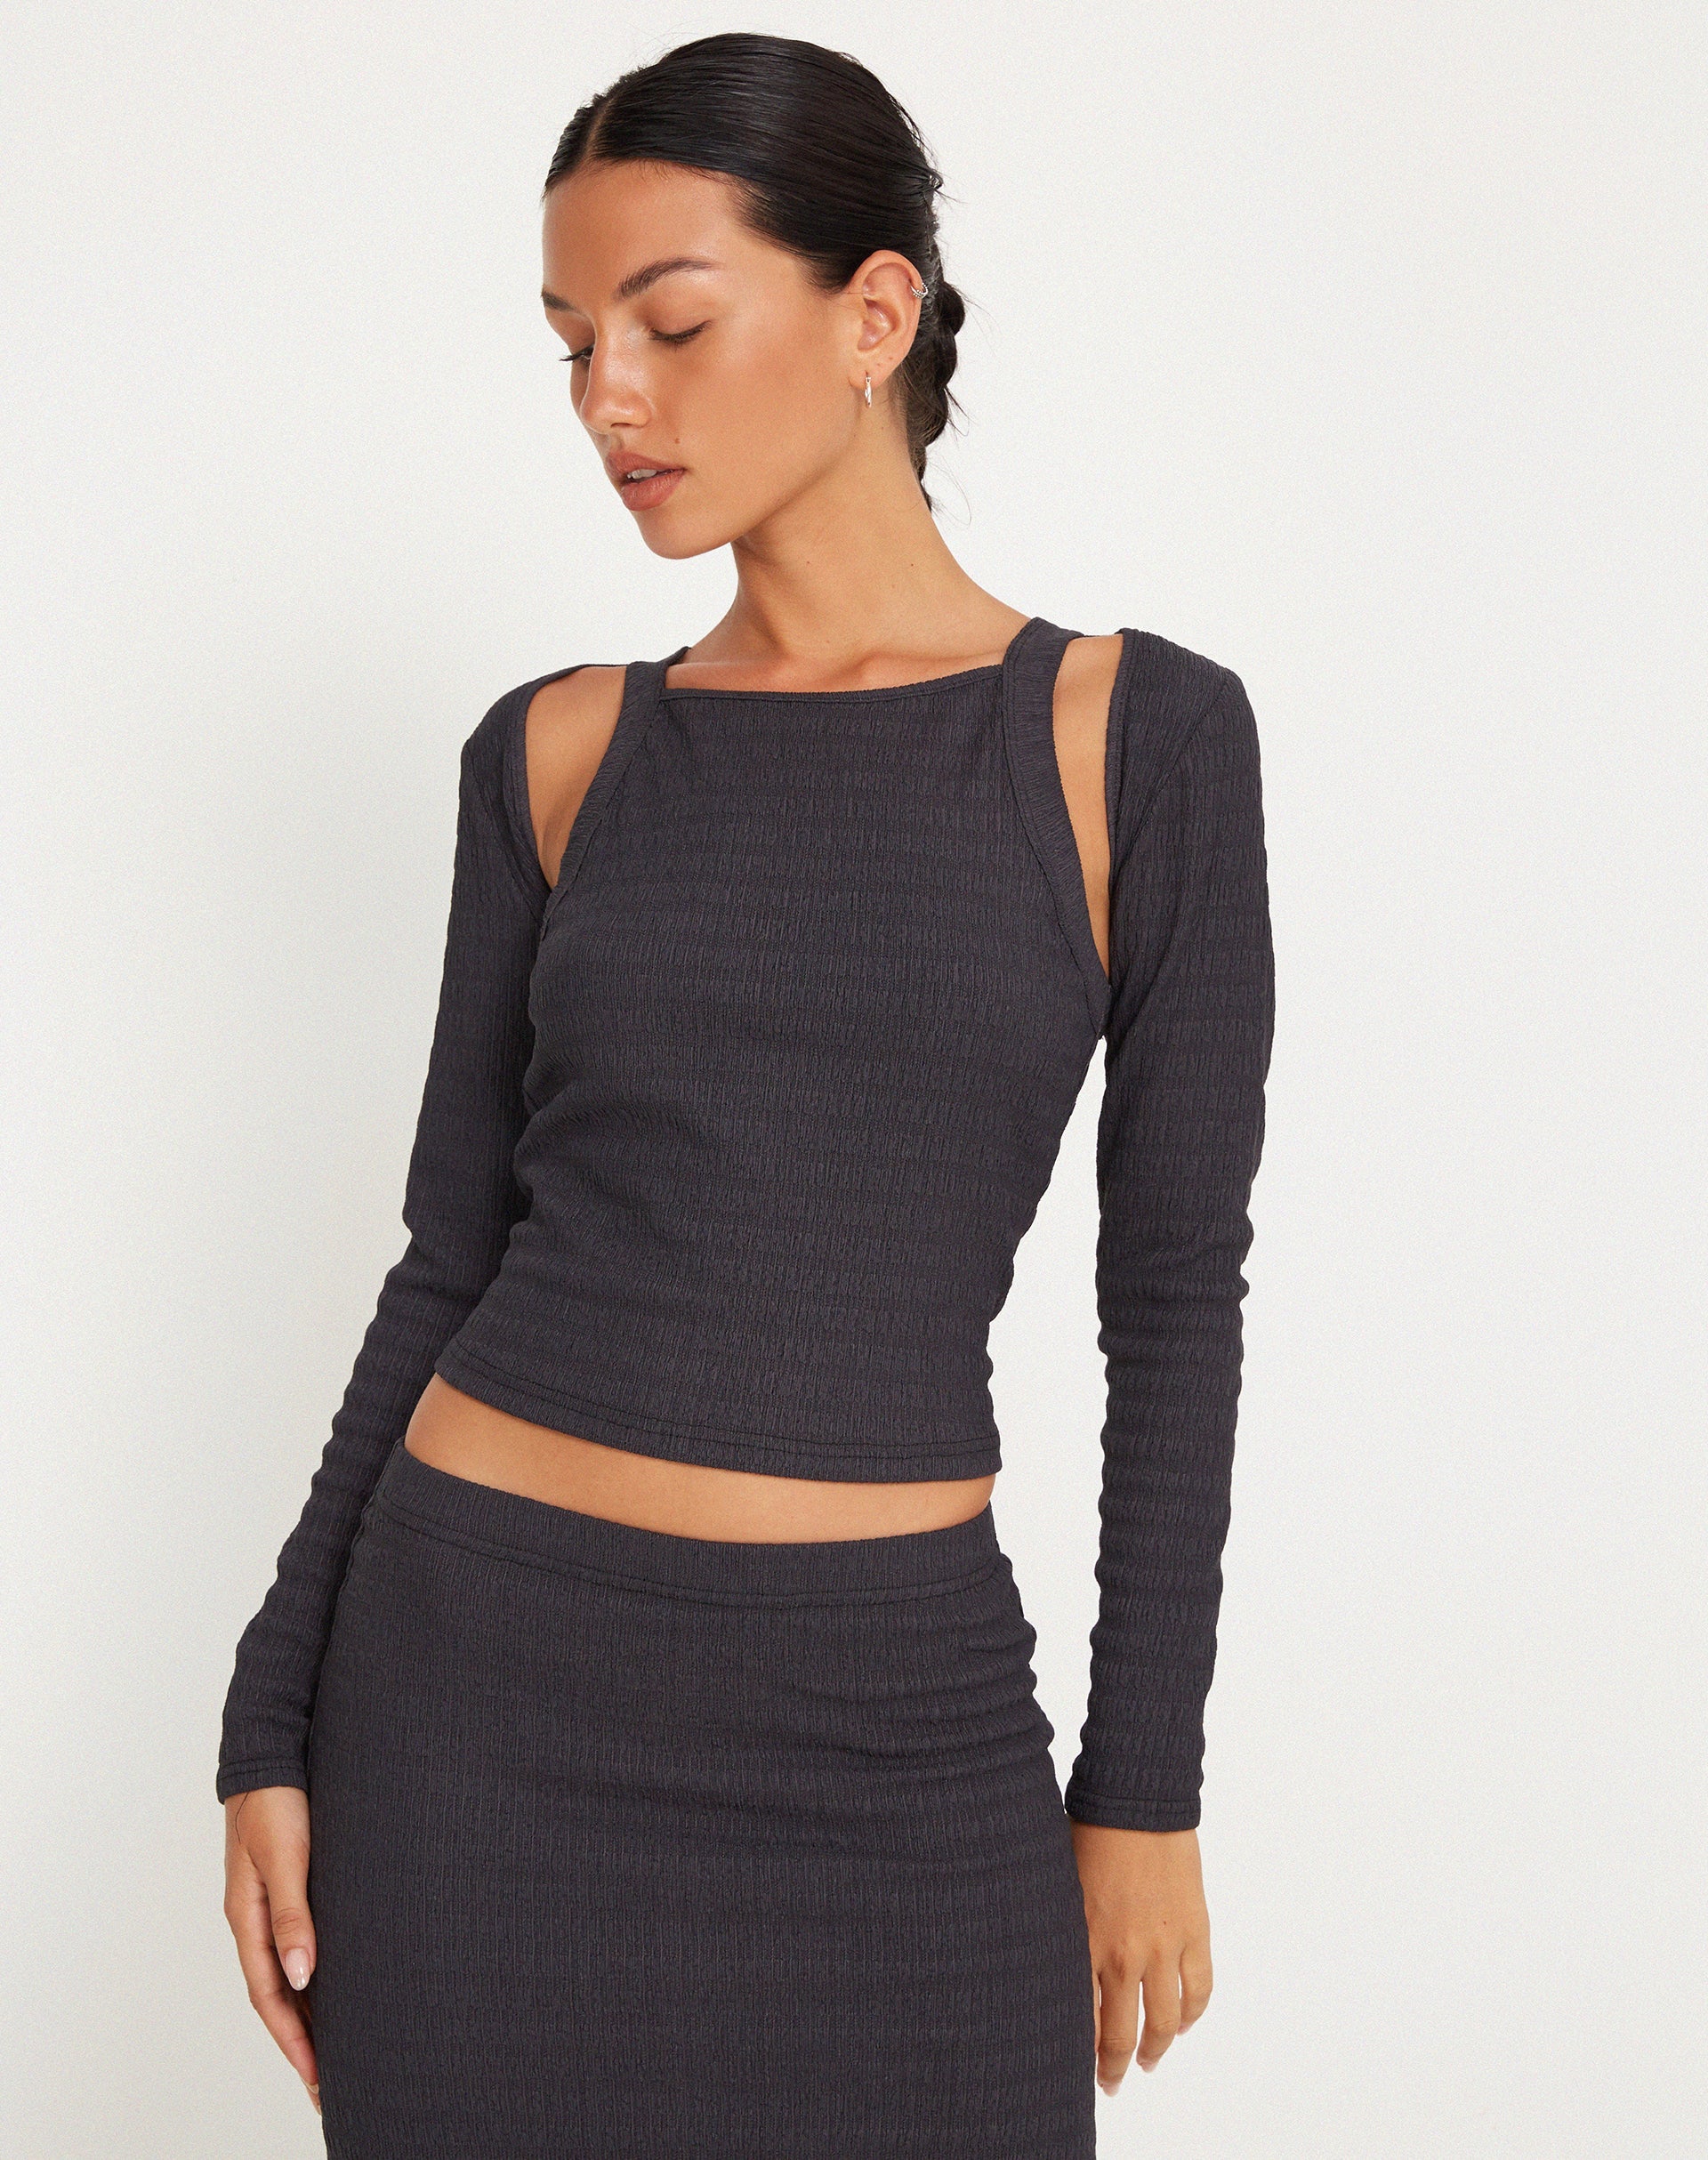 image of GInny Top in in Crinkle Charcoal